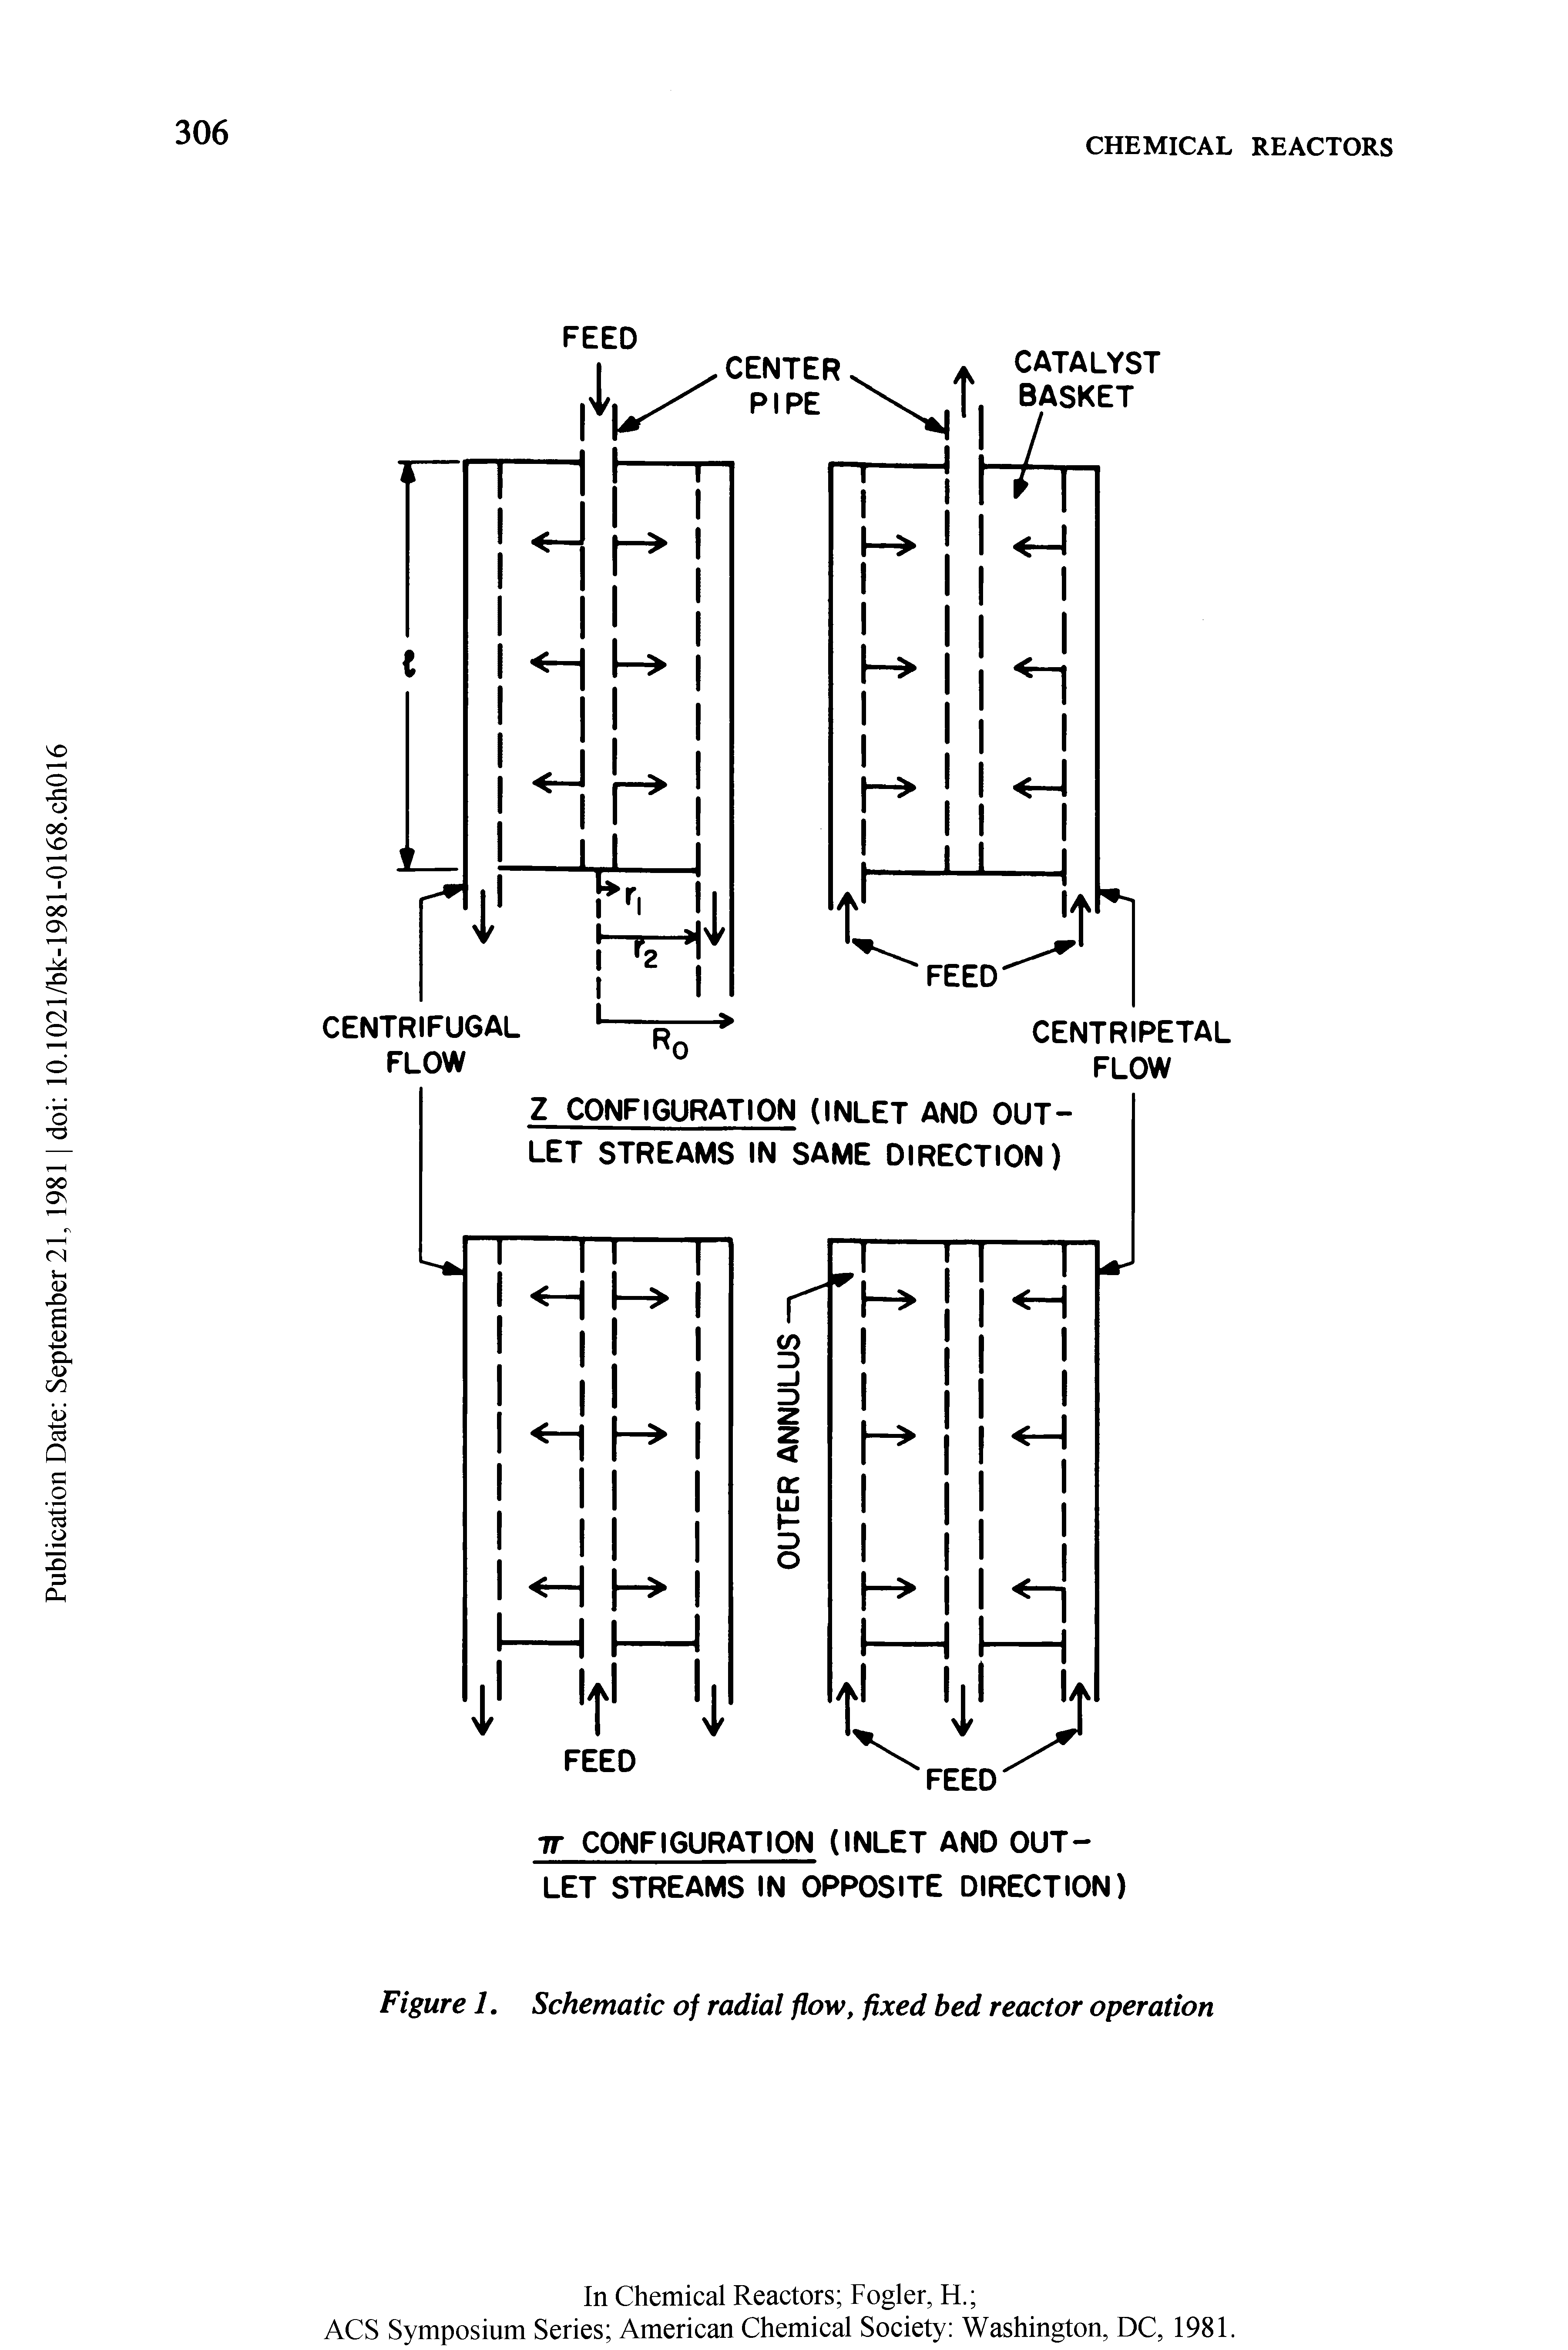 Figure 1. Schematic of radial flow, fixed bed reactor operation...